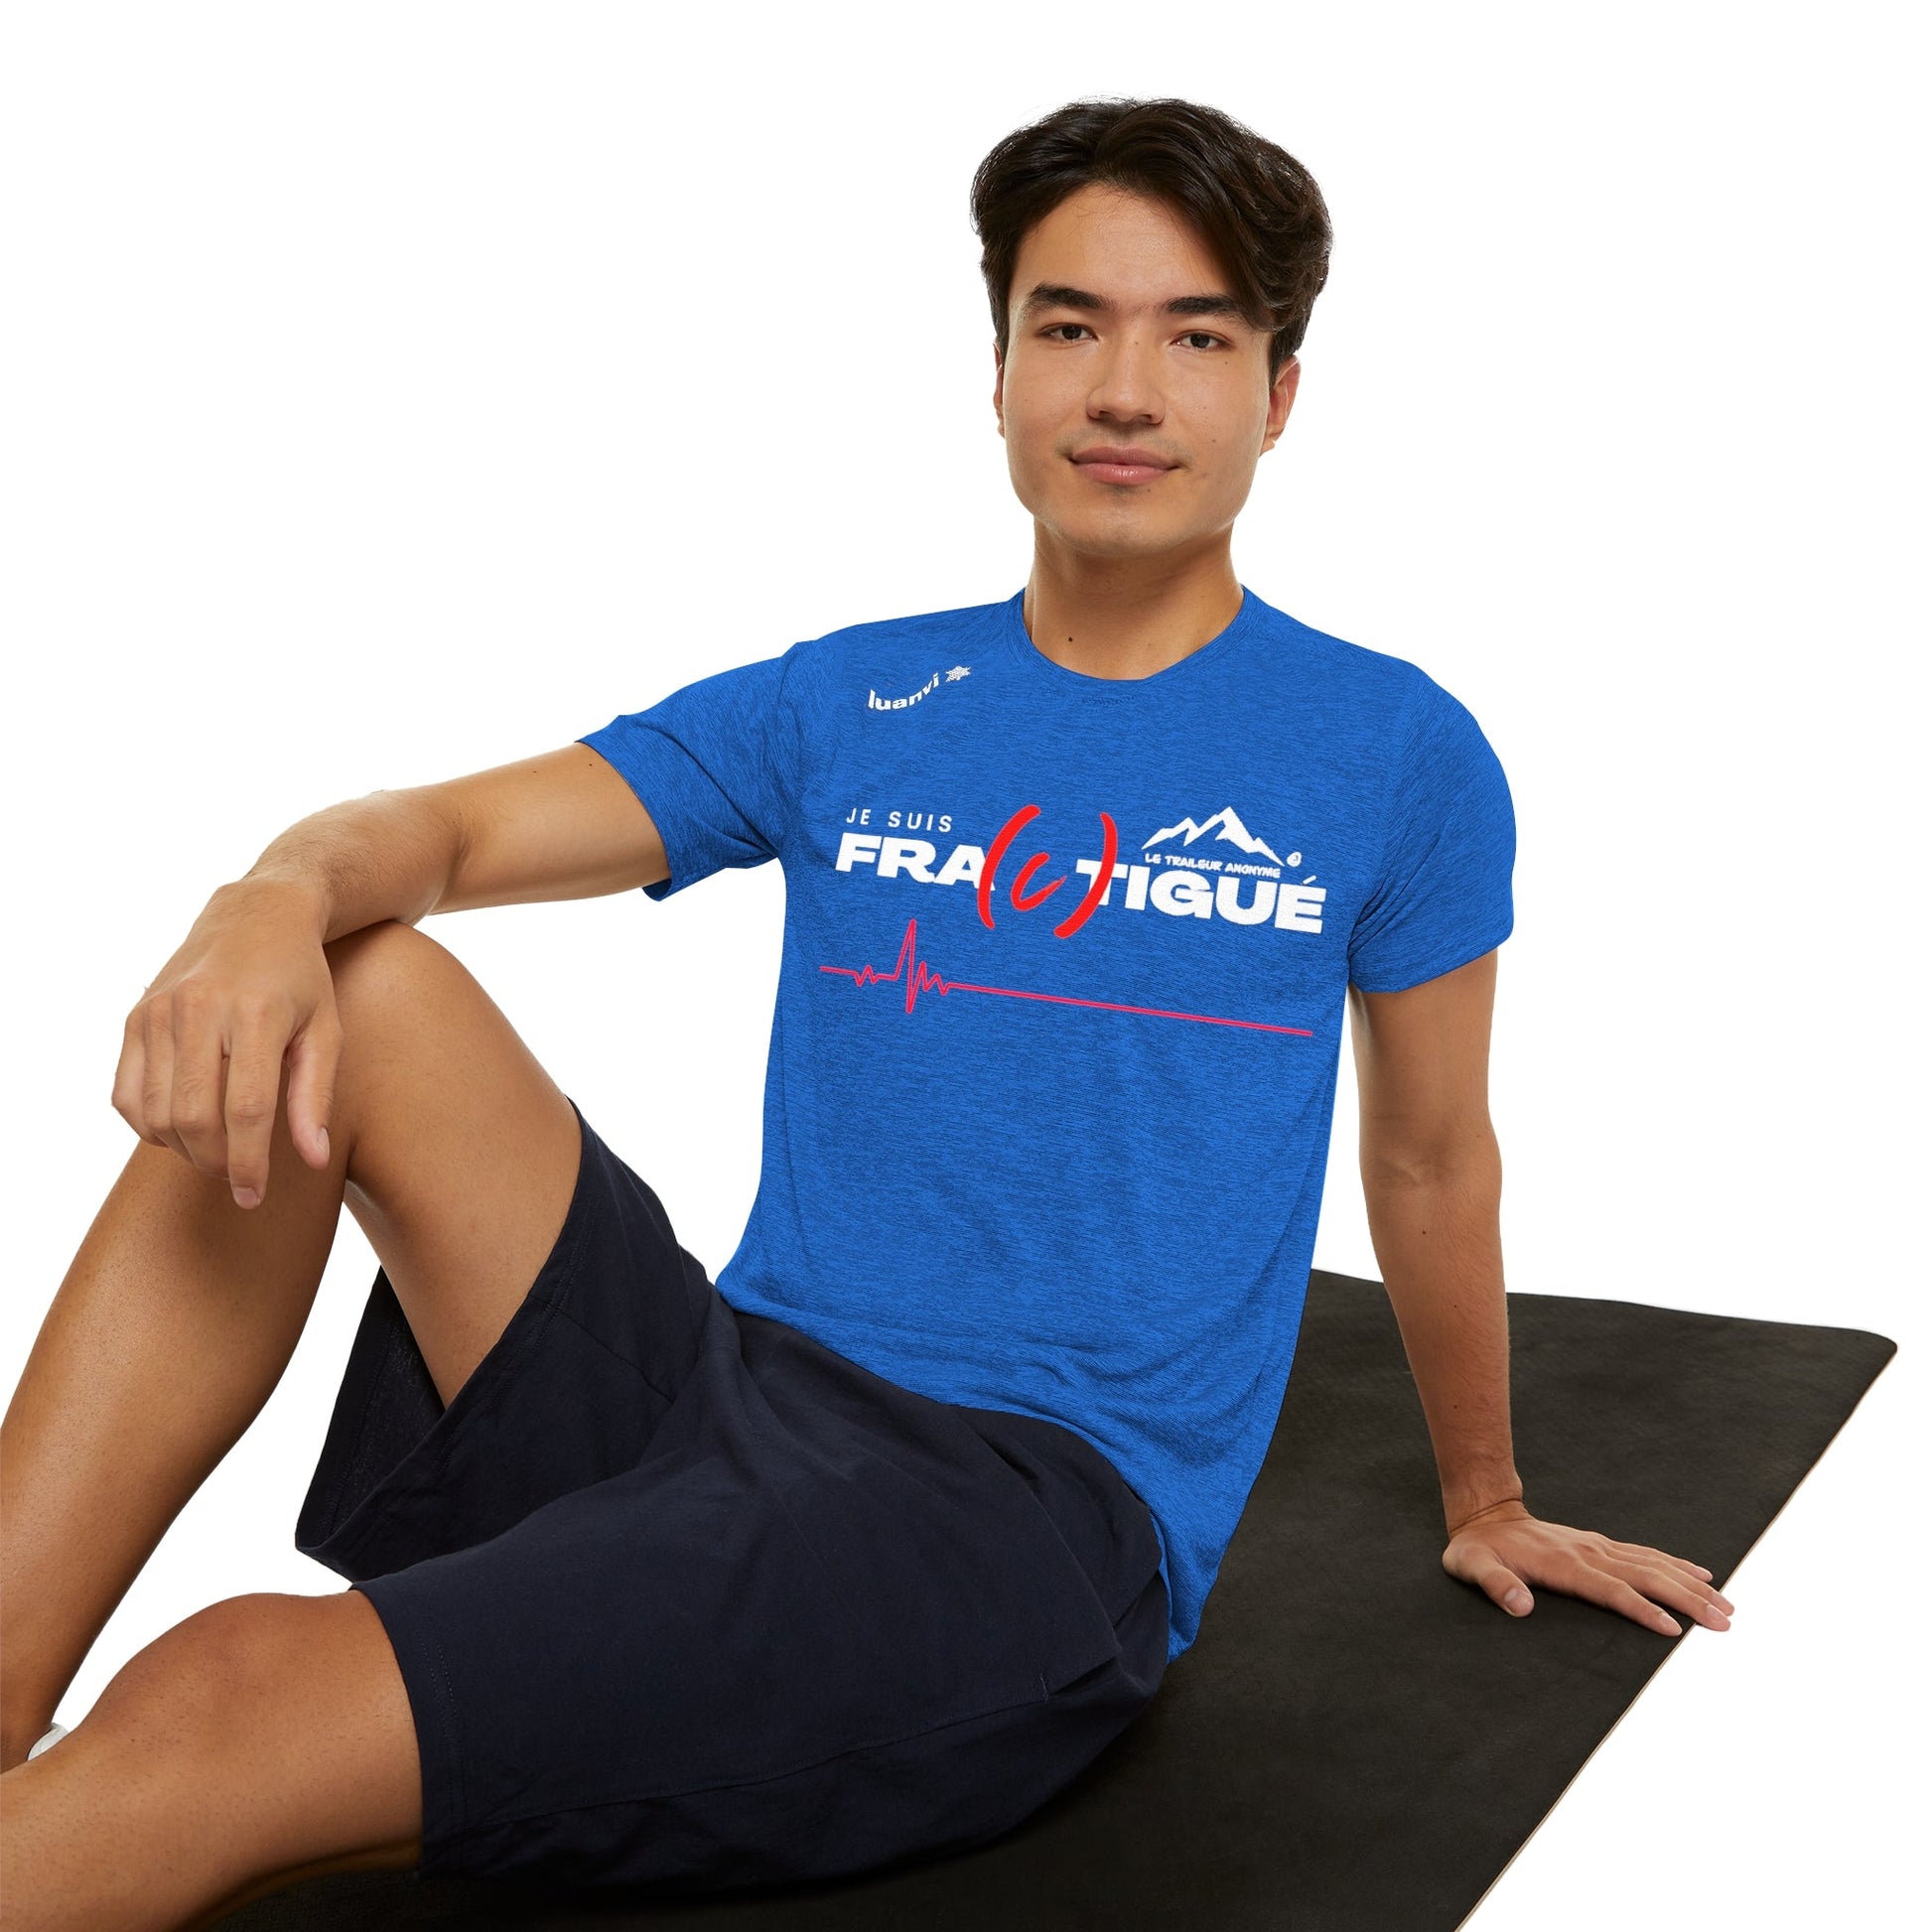 T-Shirt Running - Homme - Collection "Fra©tigué" - Le Traileur Anonyme